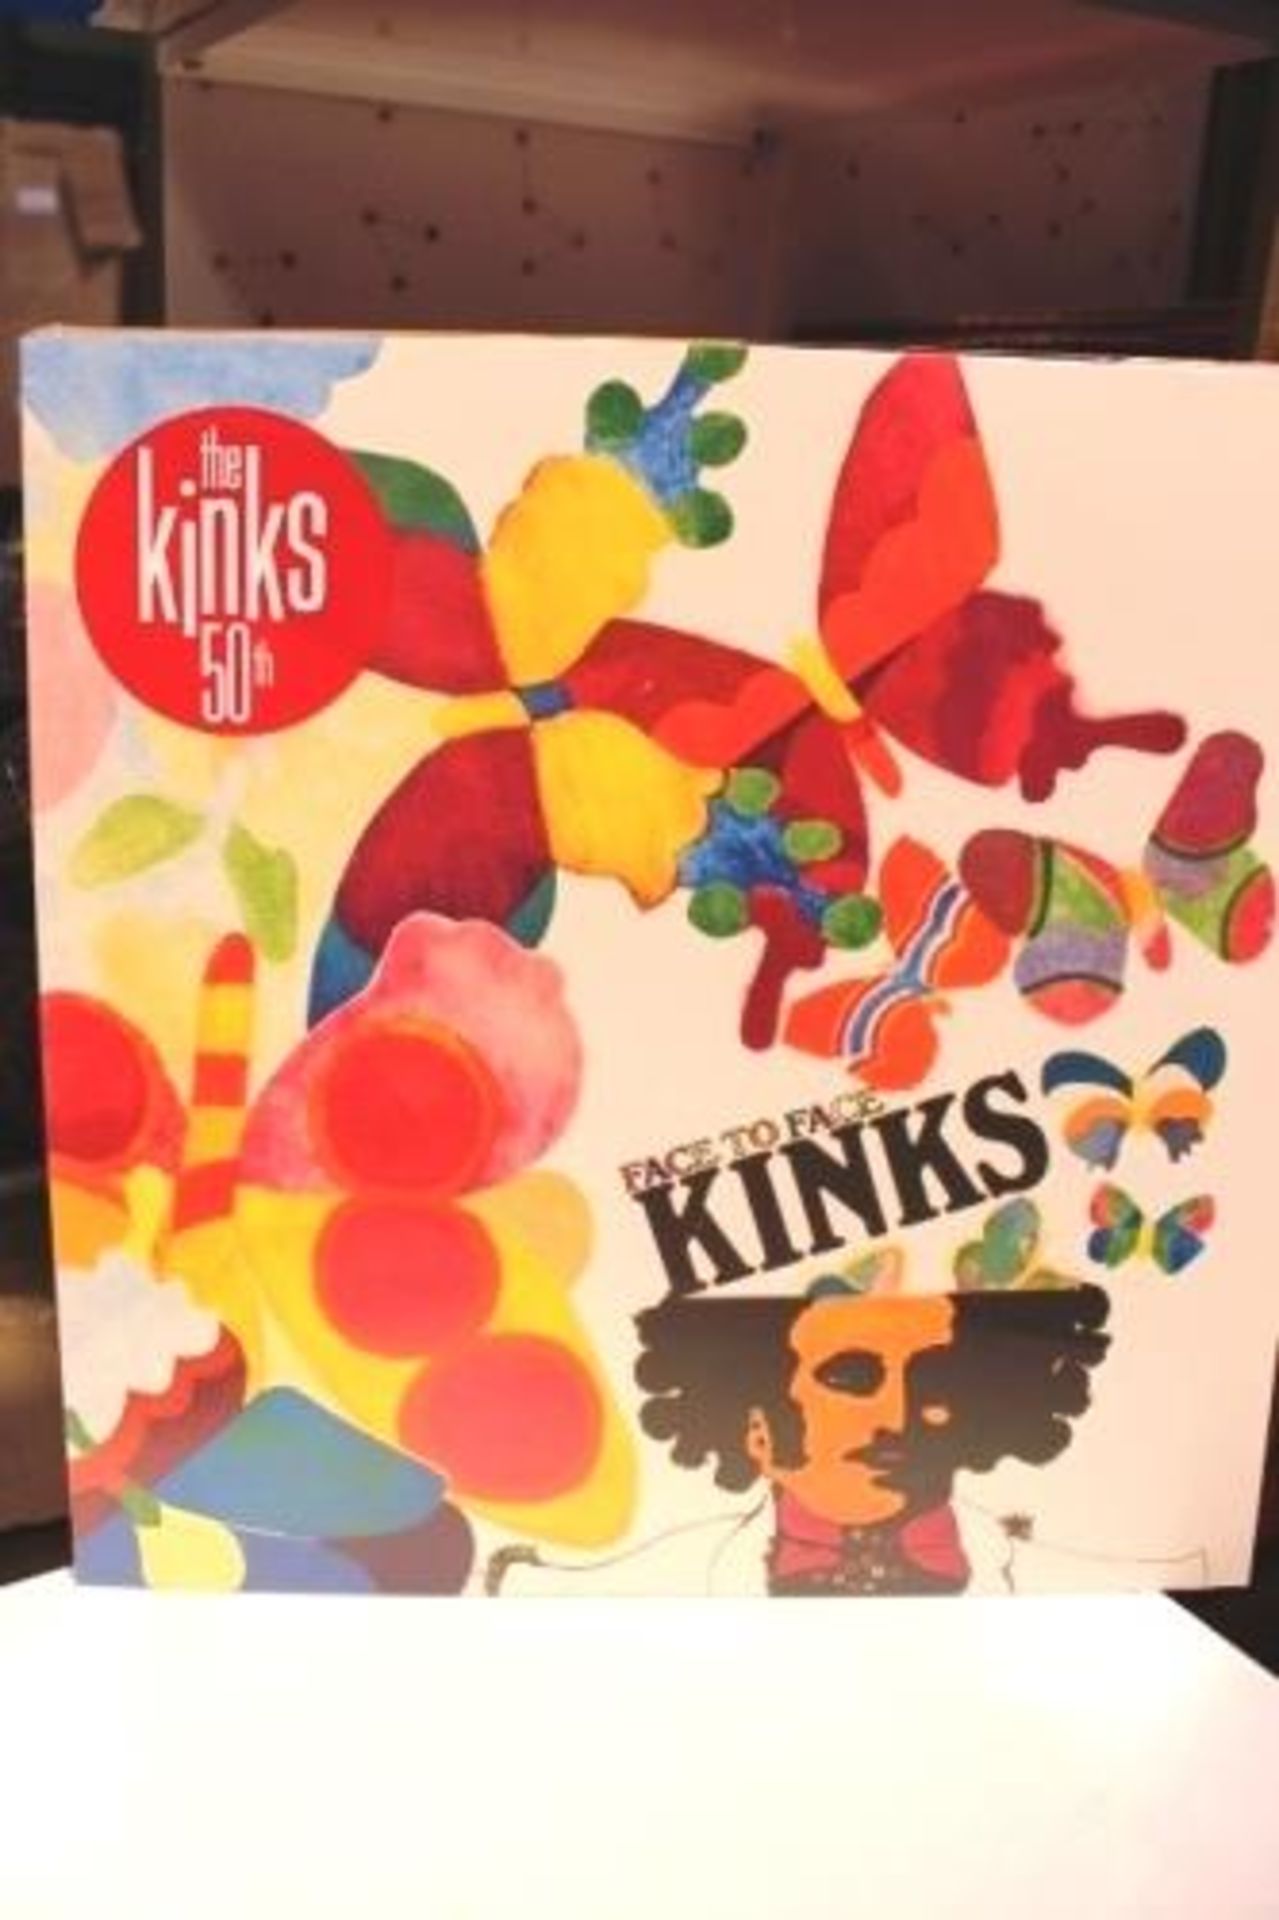 5 x vinyl's comprising 2 x Very Best of Morrissey, 2 x Face to Face, The Kinks and 1 x Crobot - Image 2 of 3